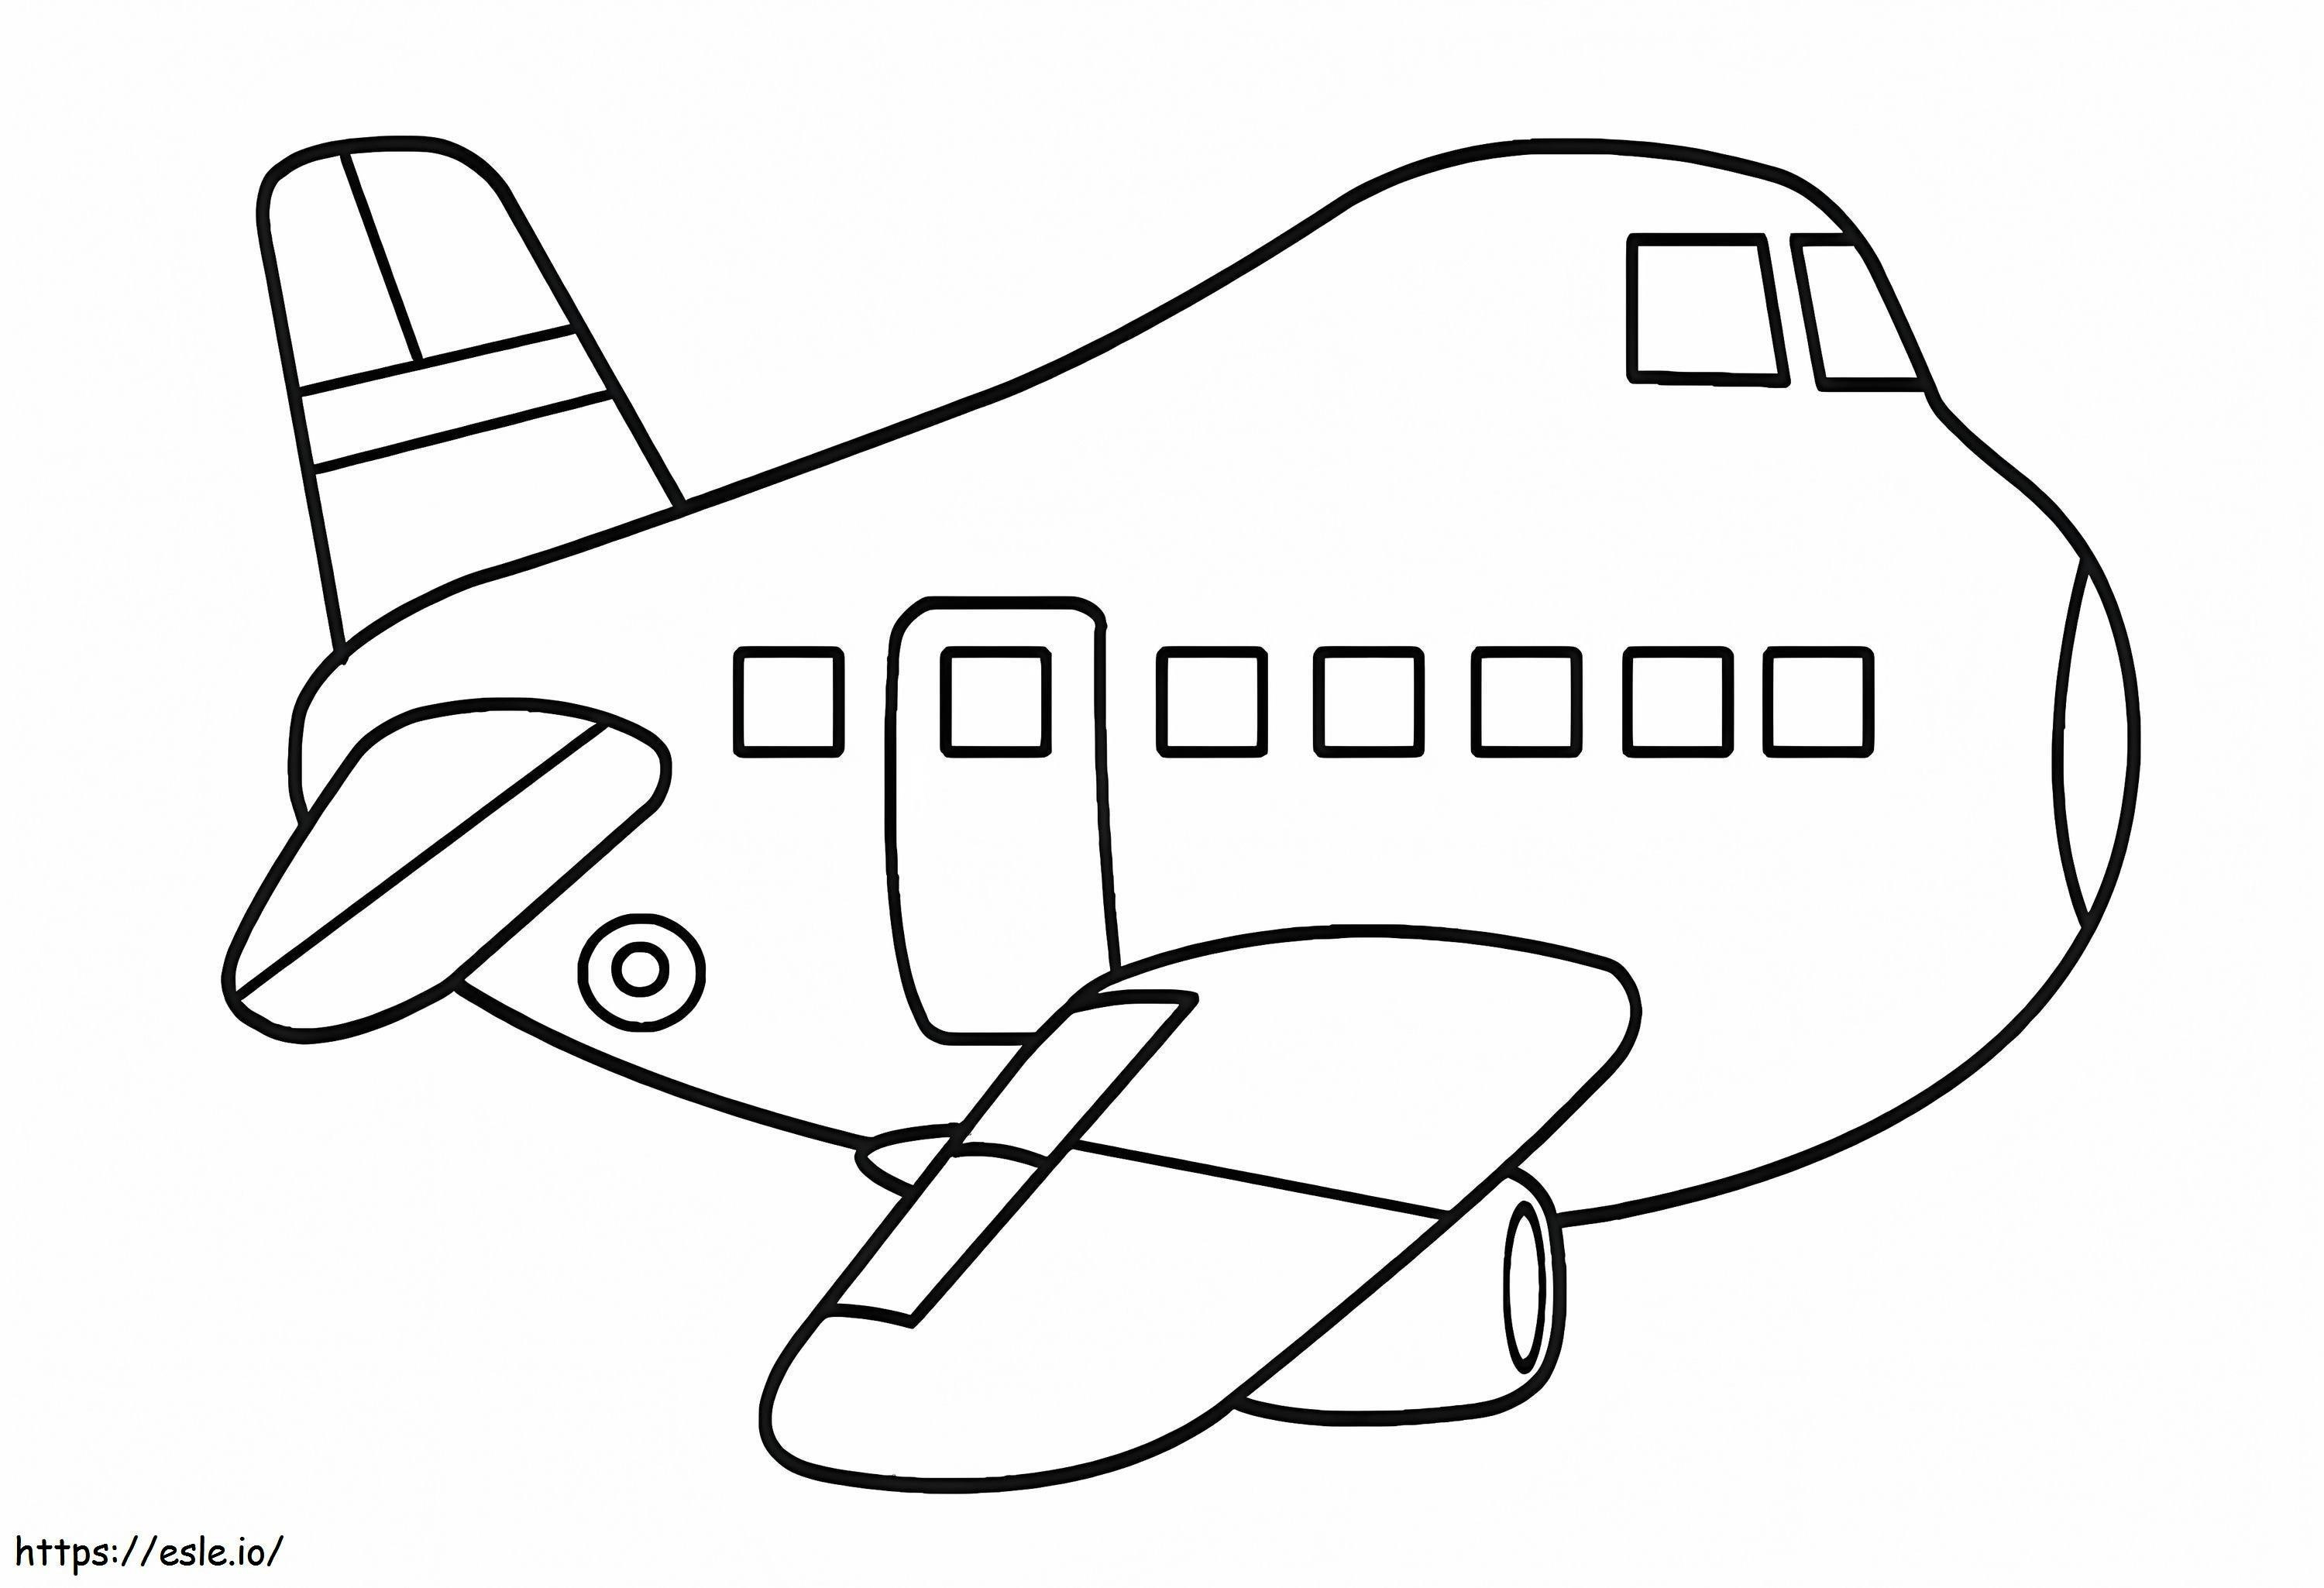 Fat Planes coloring page